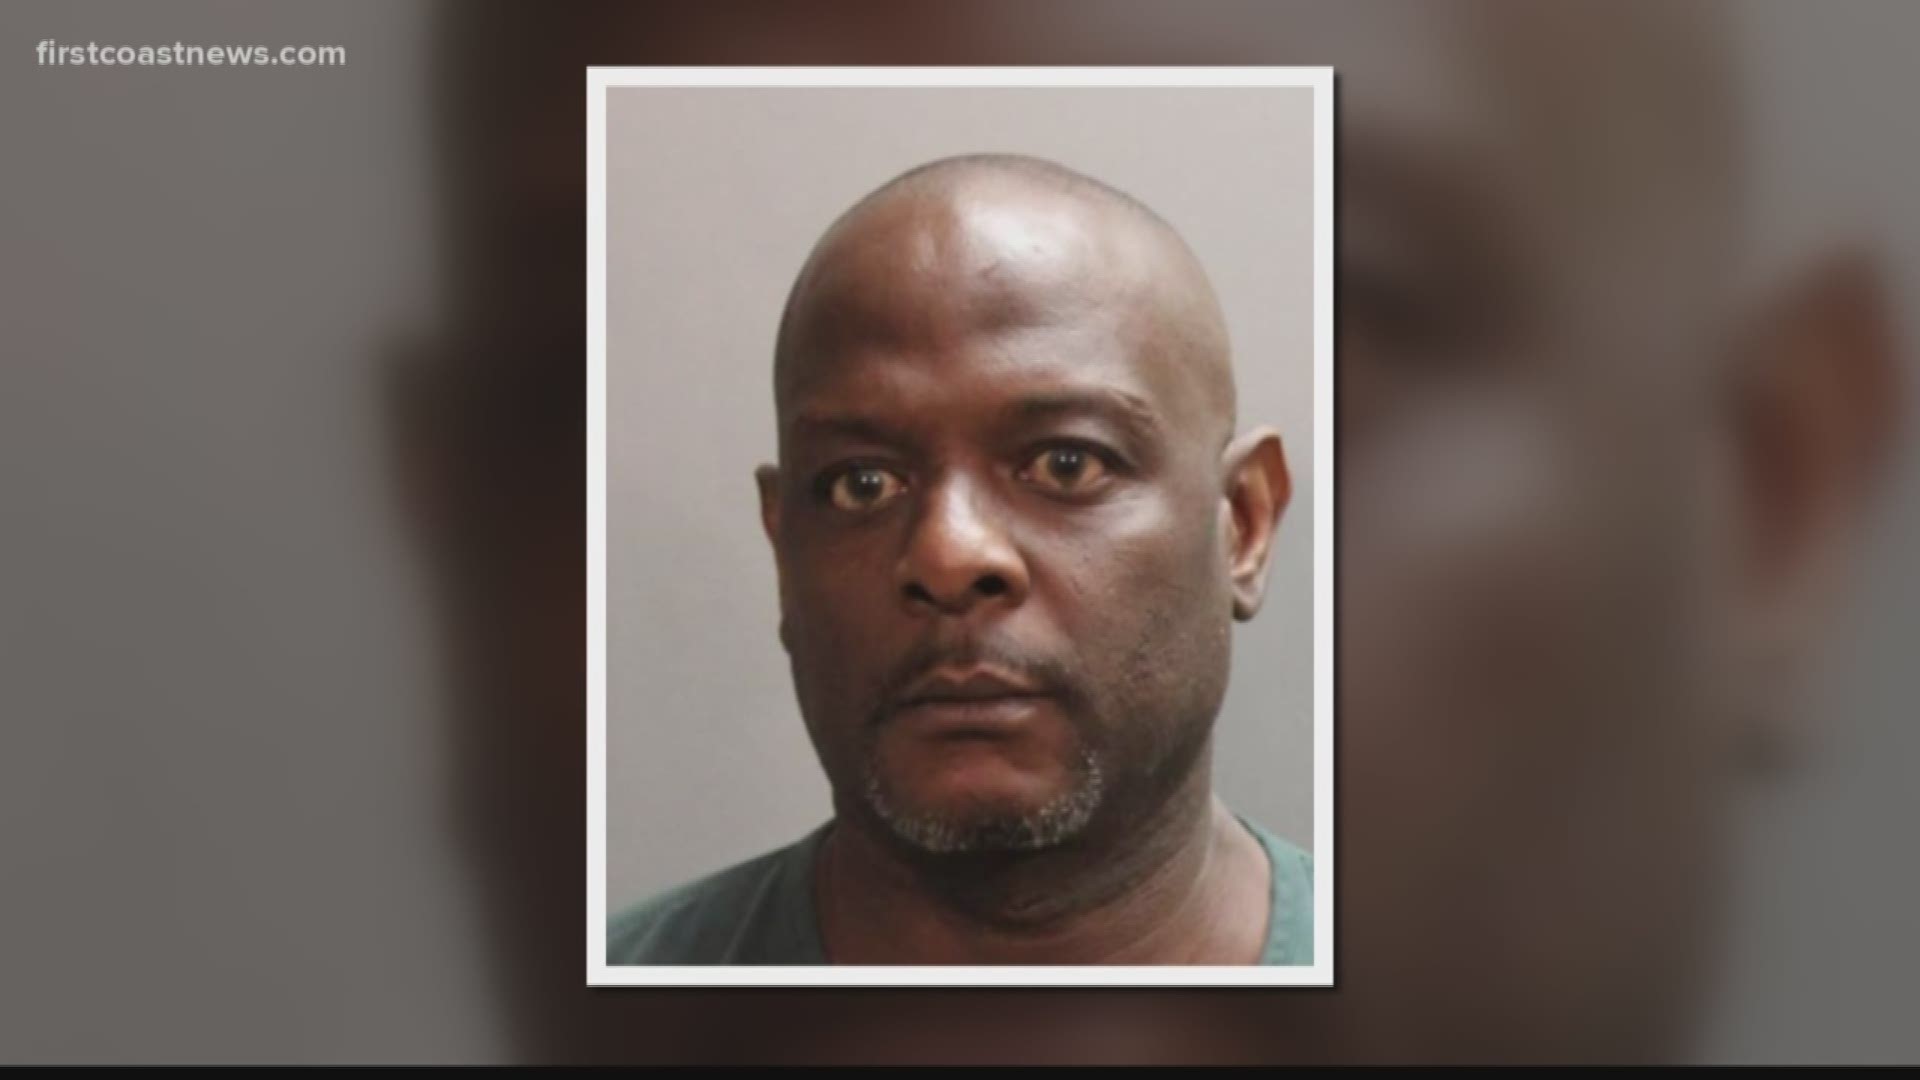 The Jacksonville Sheriff's Office has arrested a man in connection to a murder that took place on Philips Highway last month.